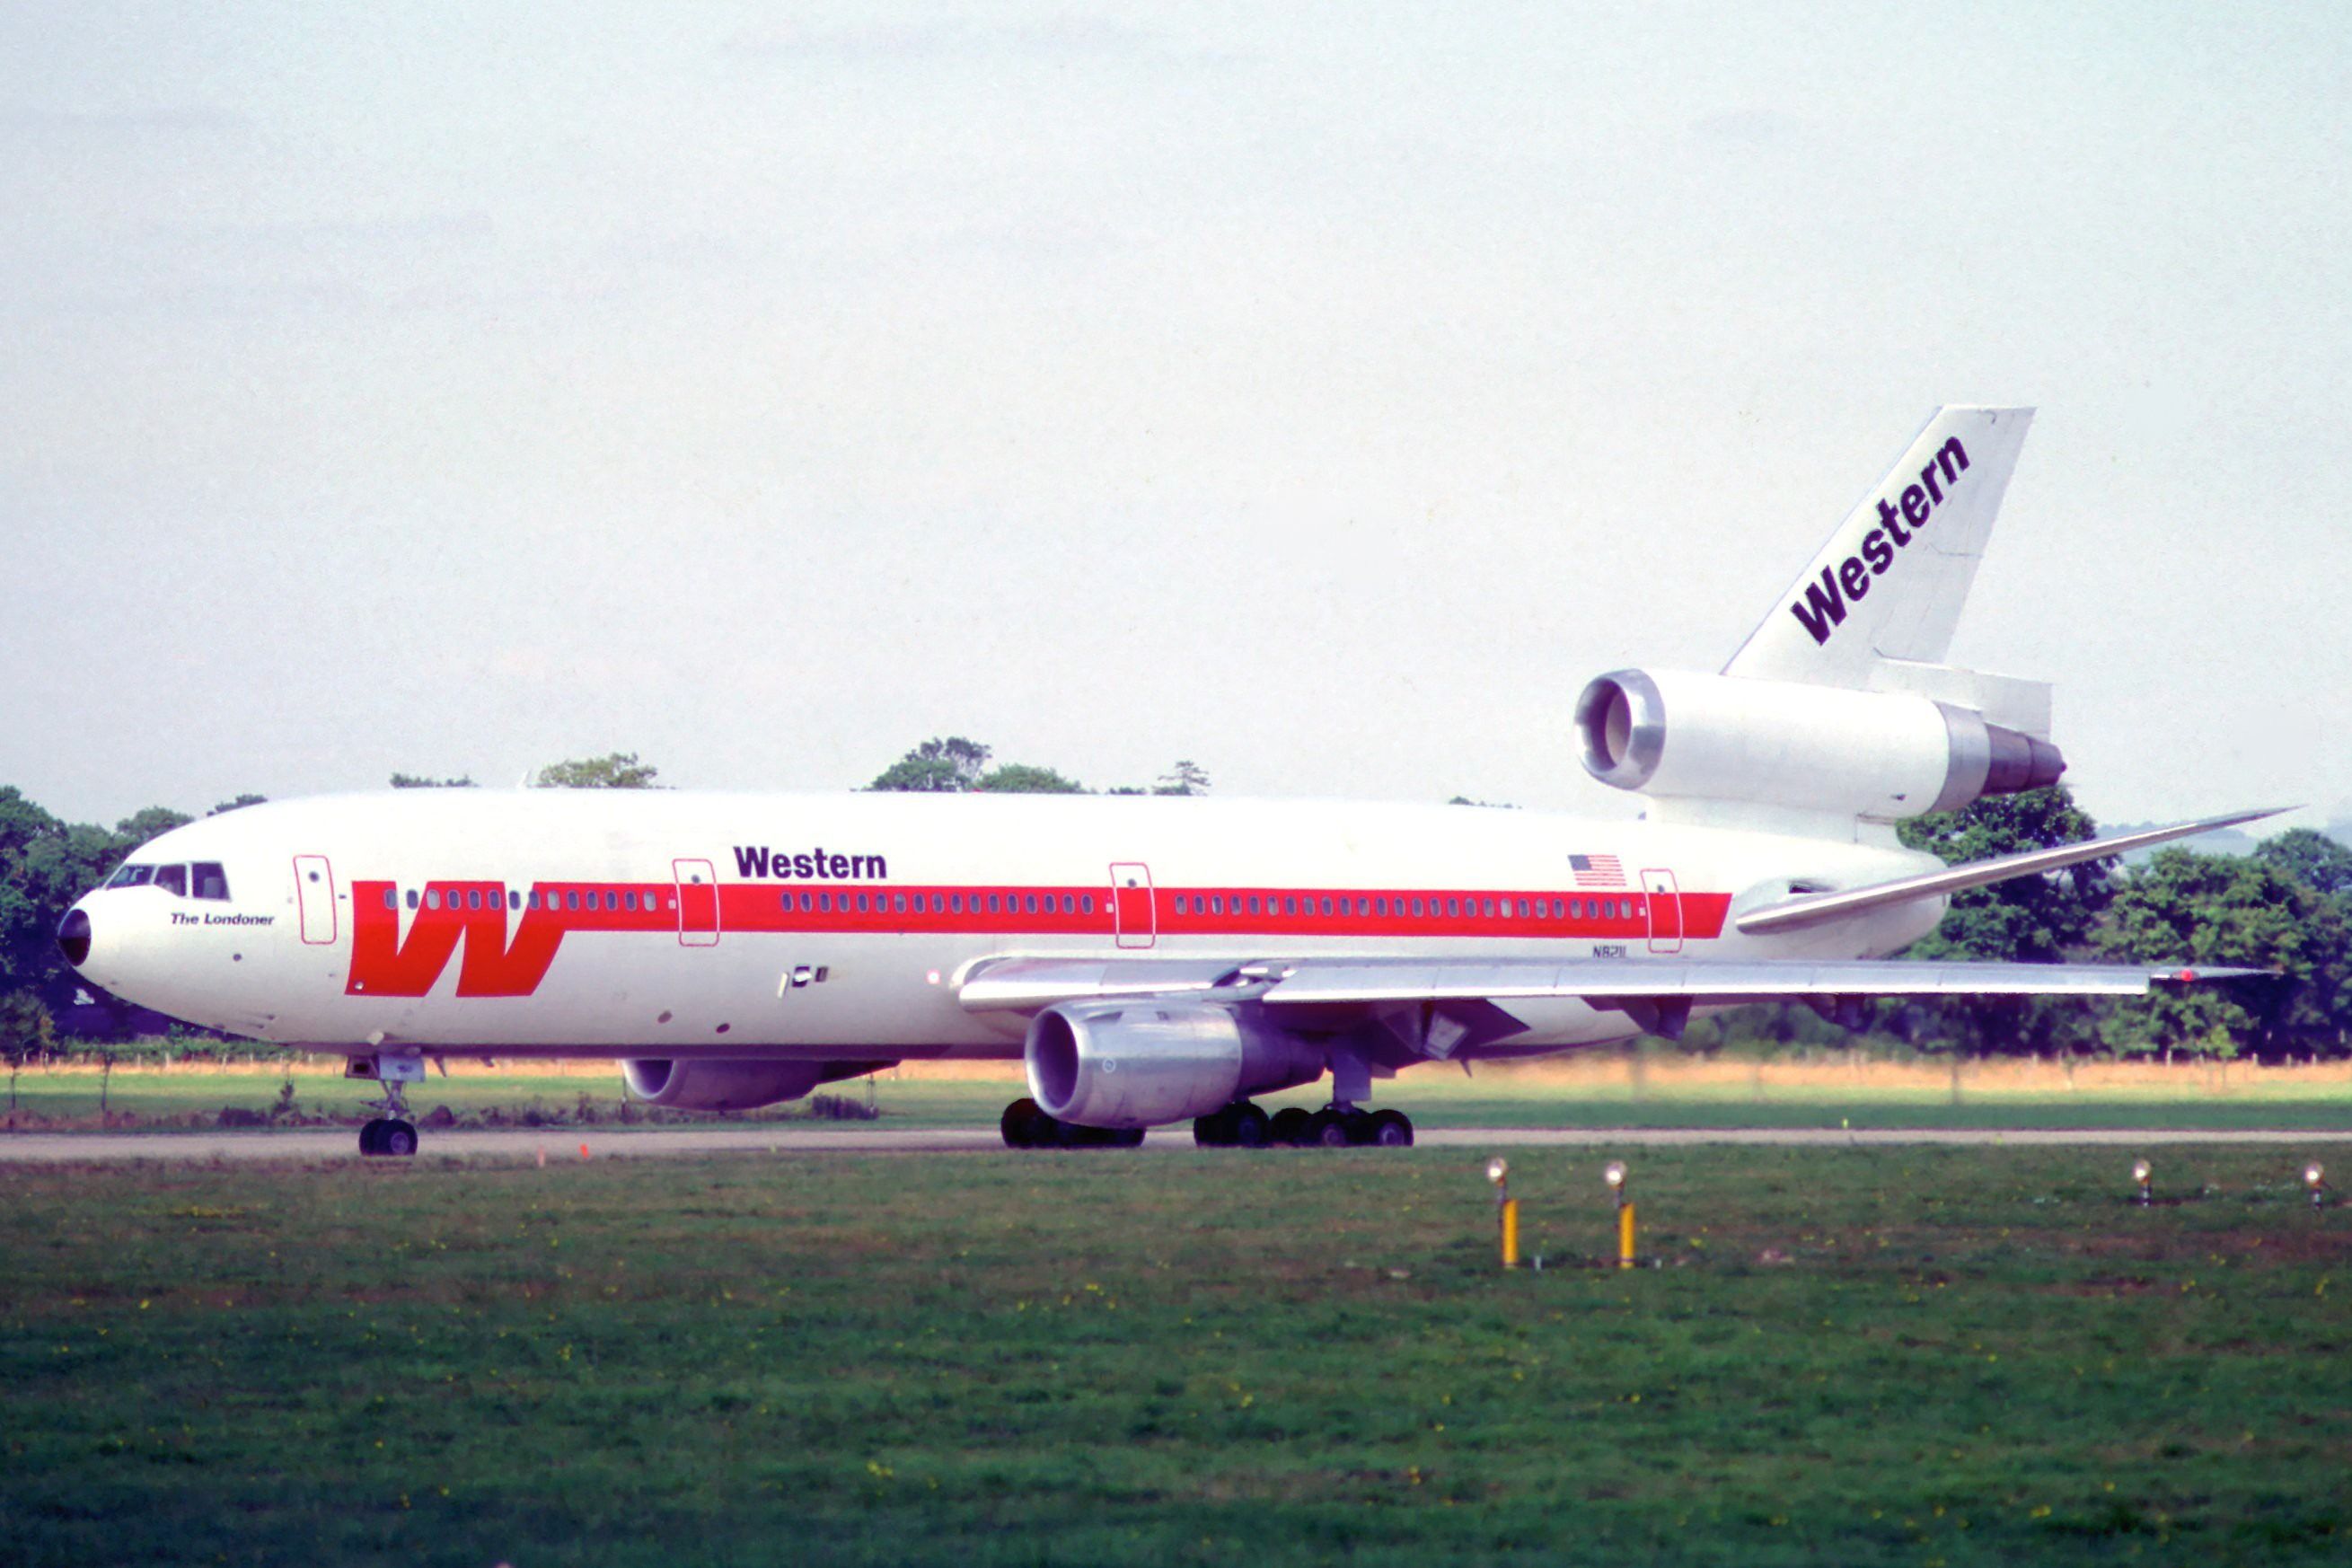 A Western Airlines DC-10-30 on an airport apron.